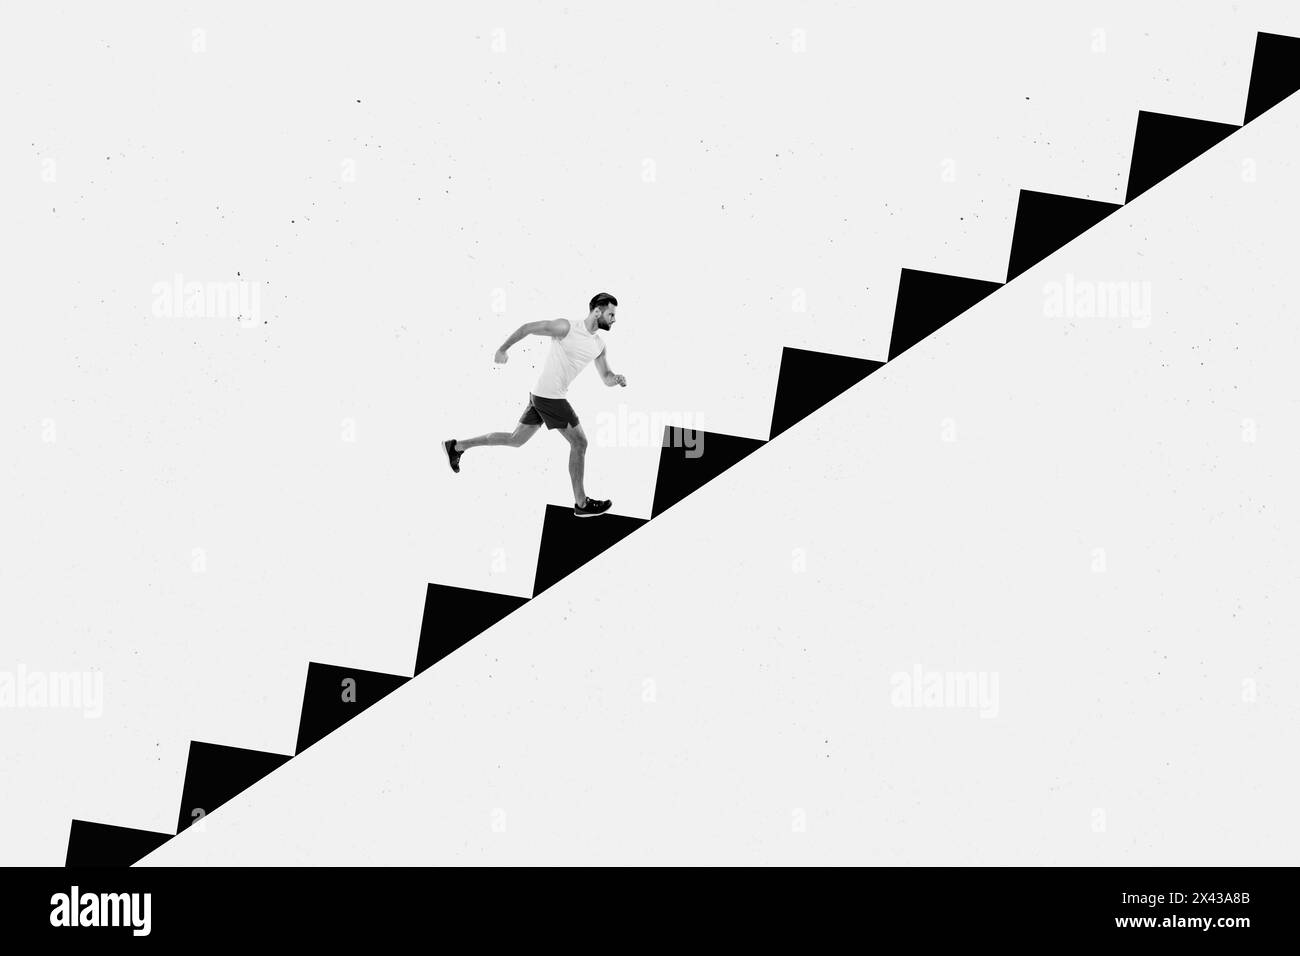 3D photo collage artwork sketch image of silhouette young sportive man run jump on stairs up high career promotion motivation success Stock Photo